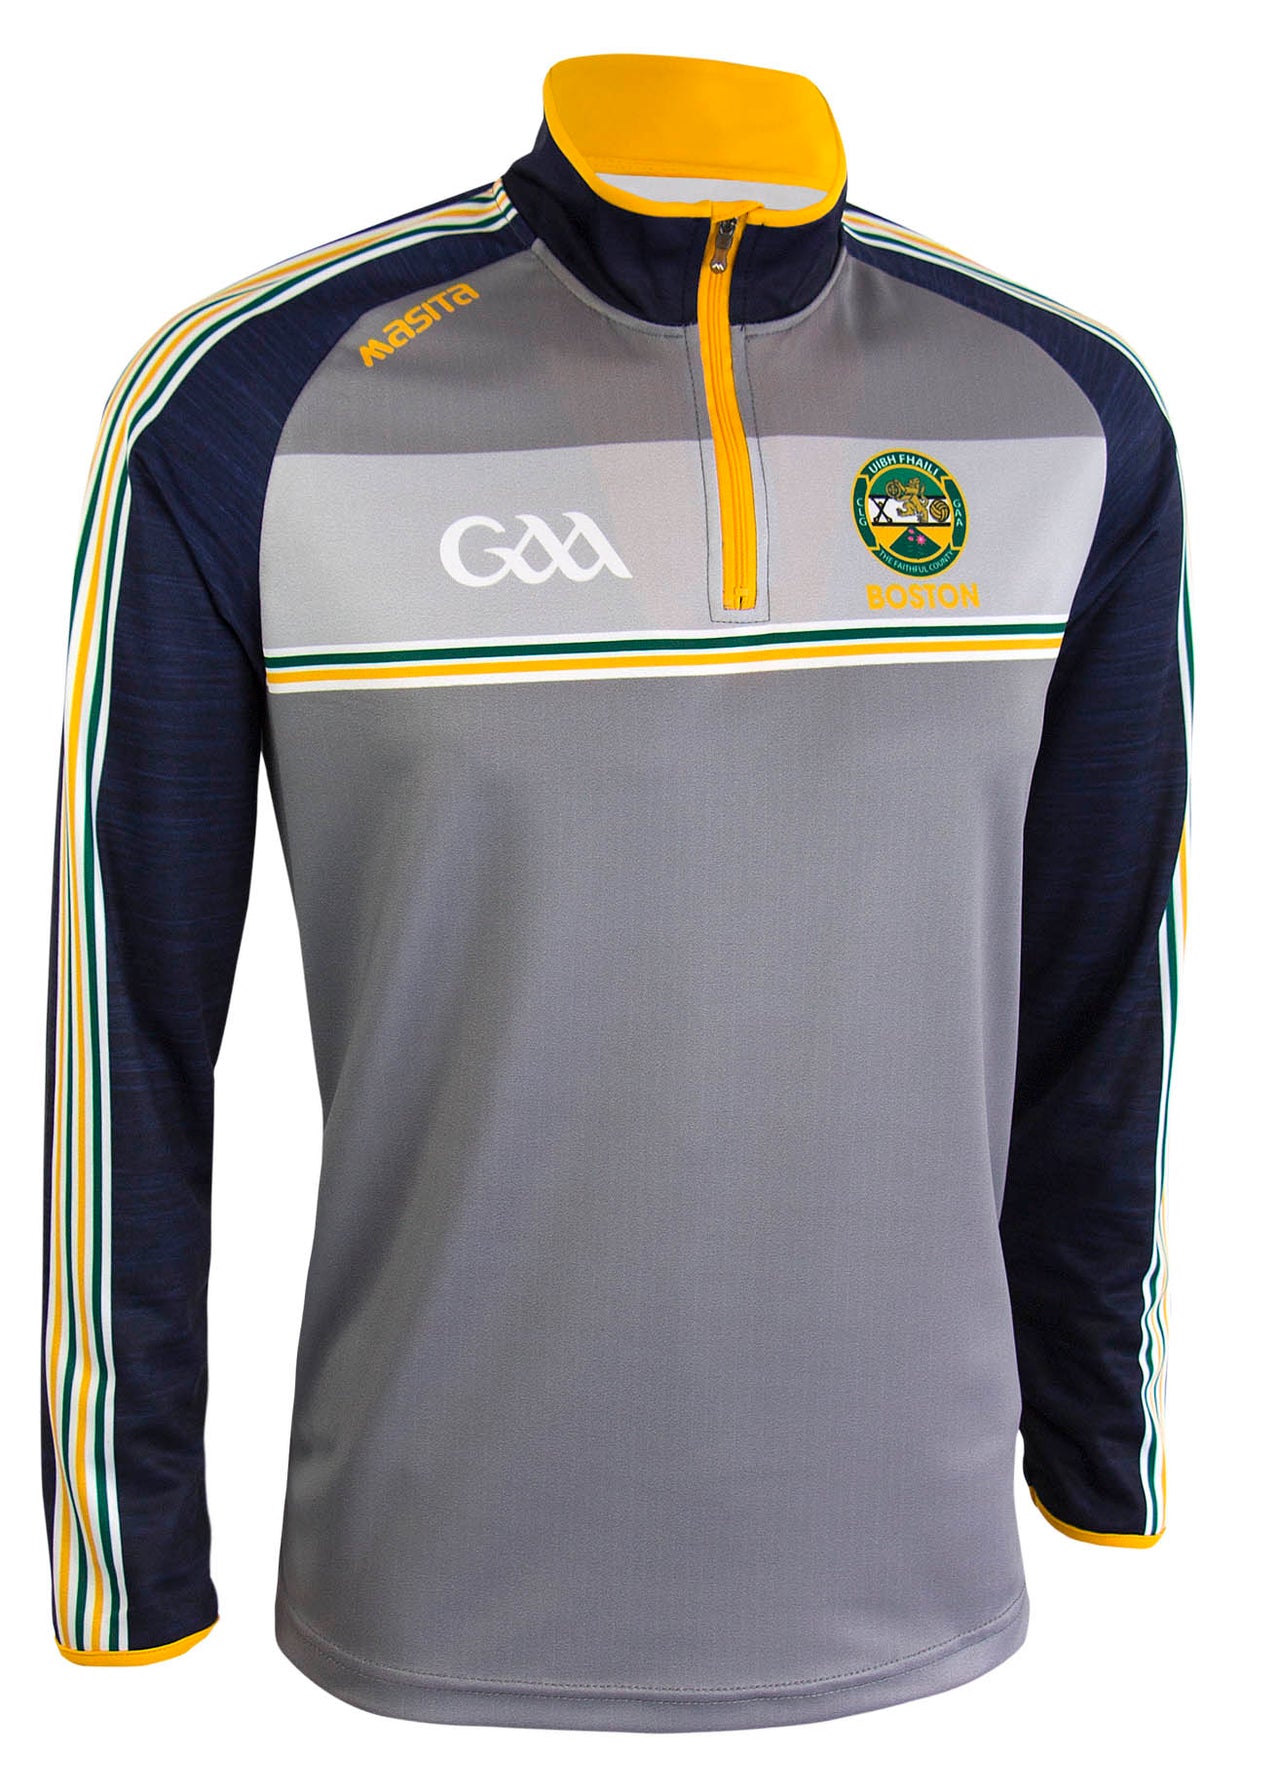 Offaly Boston Quarter Zip Adults